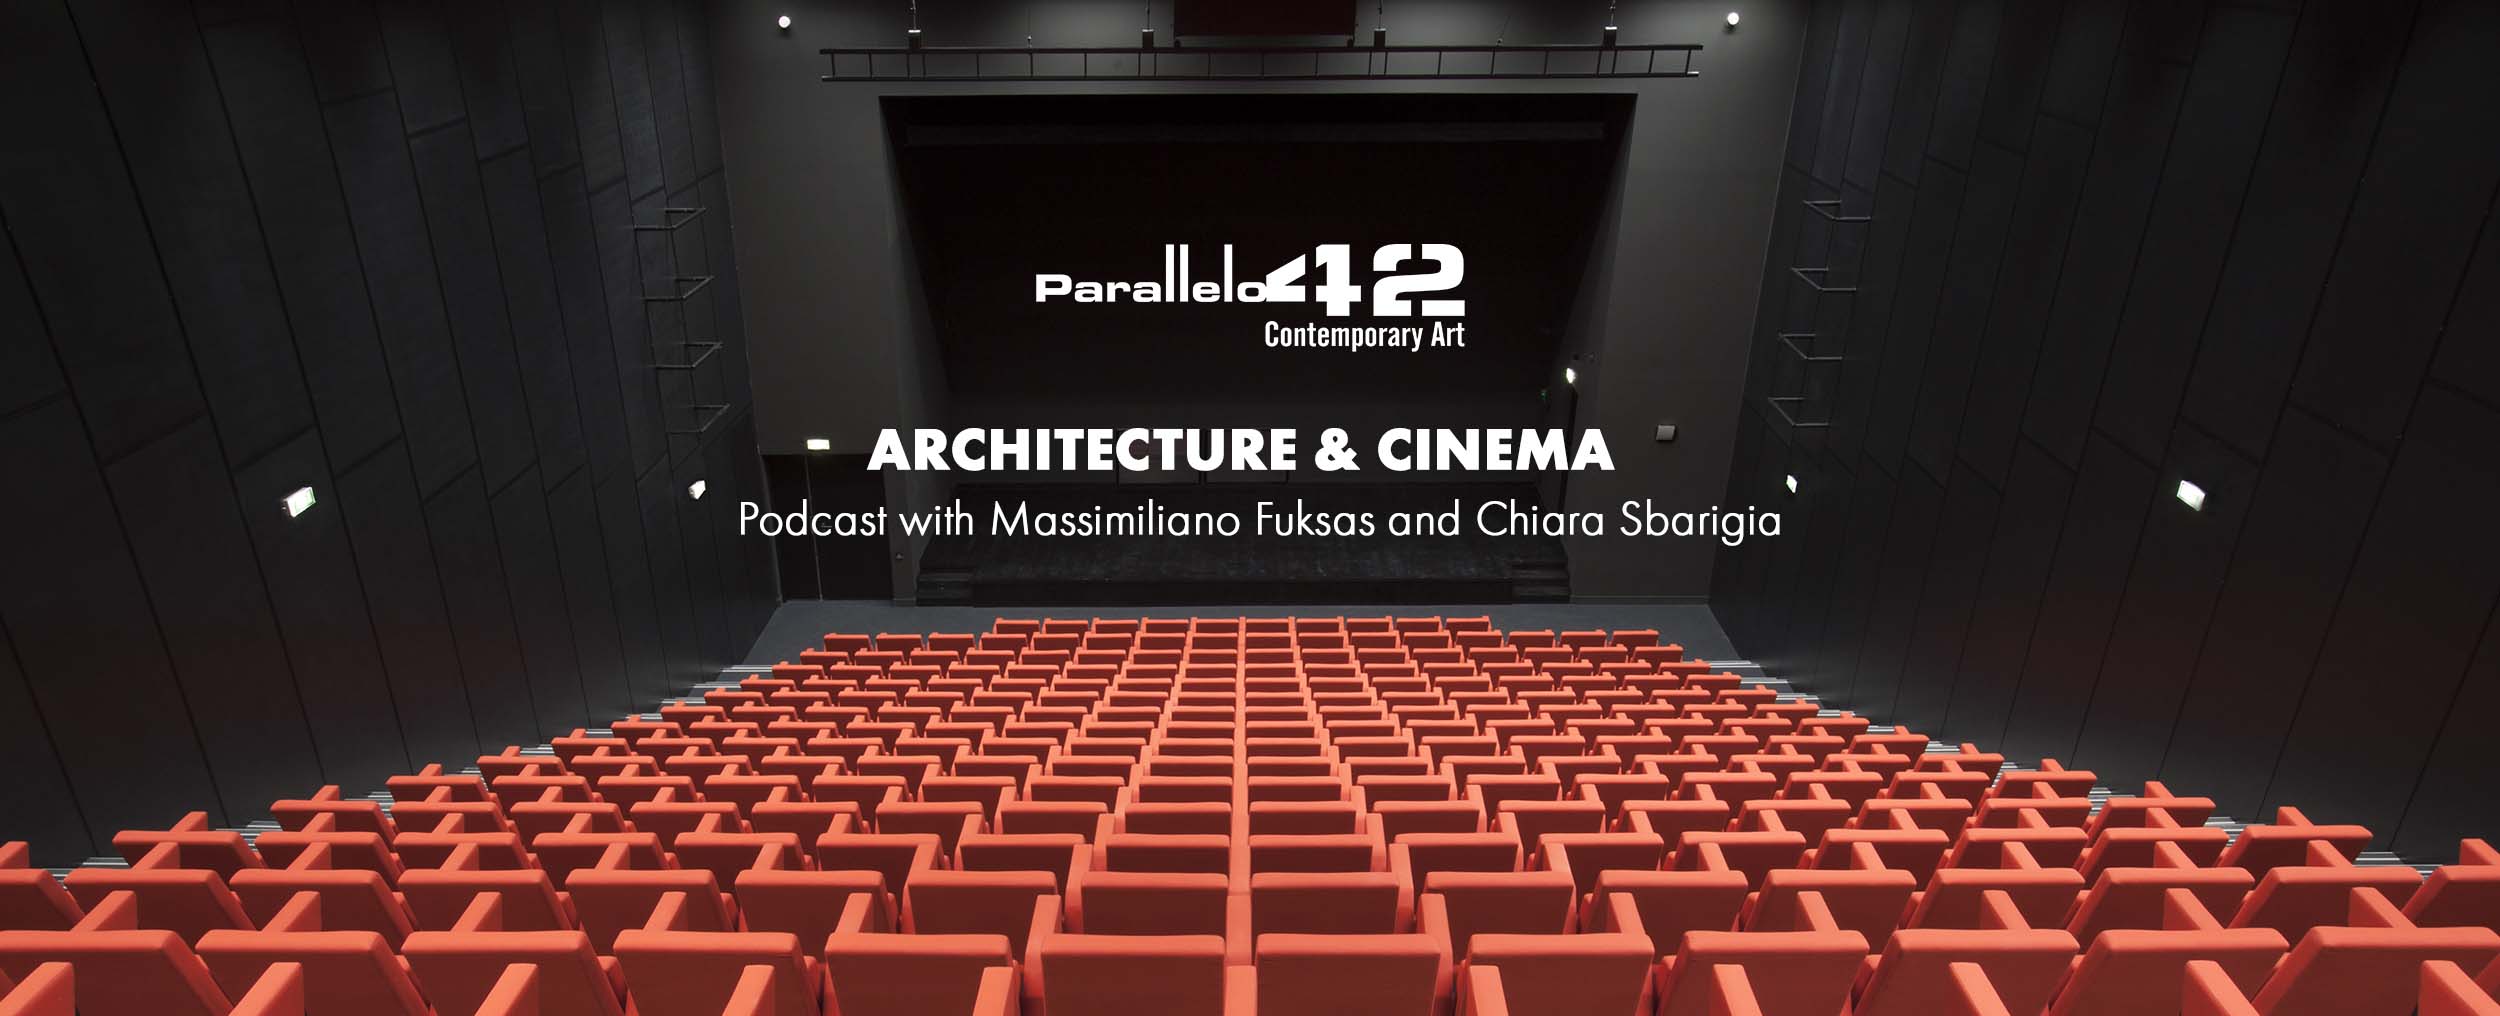 Parallelo 42: a podcast about architecture and cinema 2022, May 10